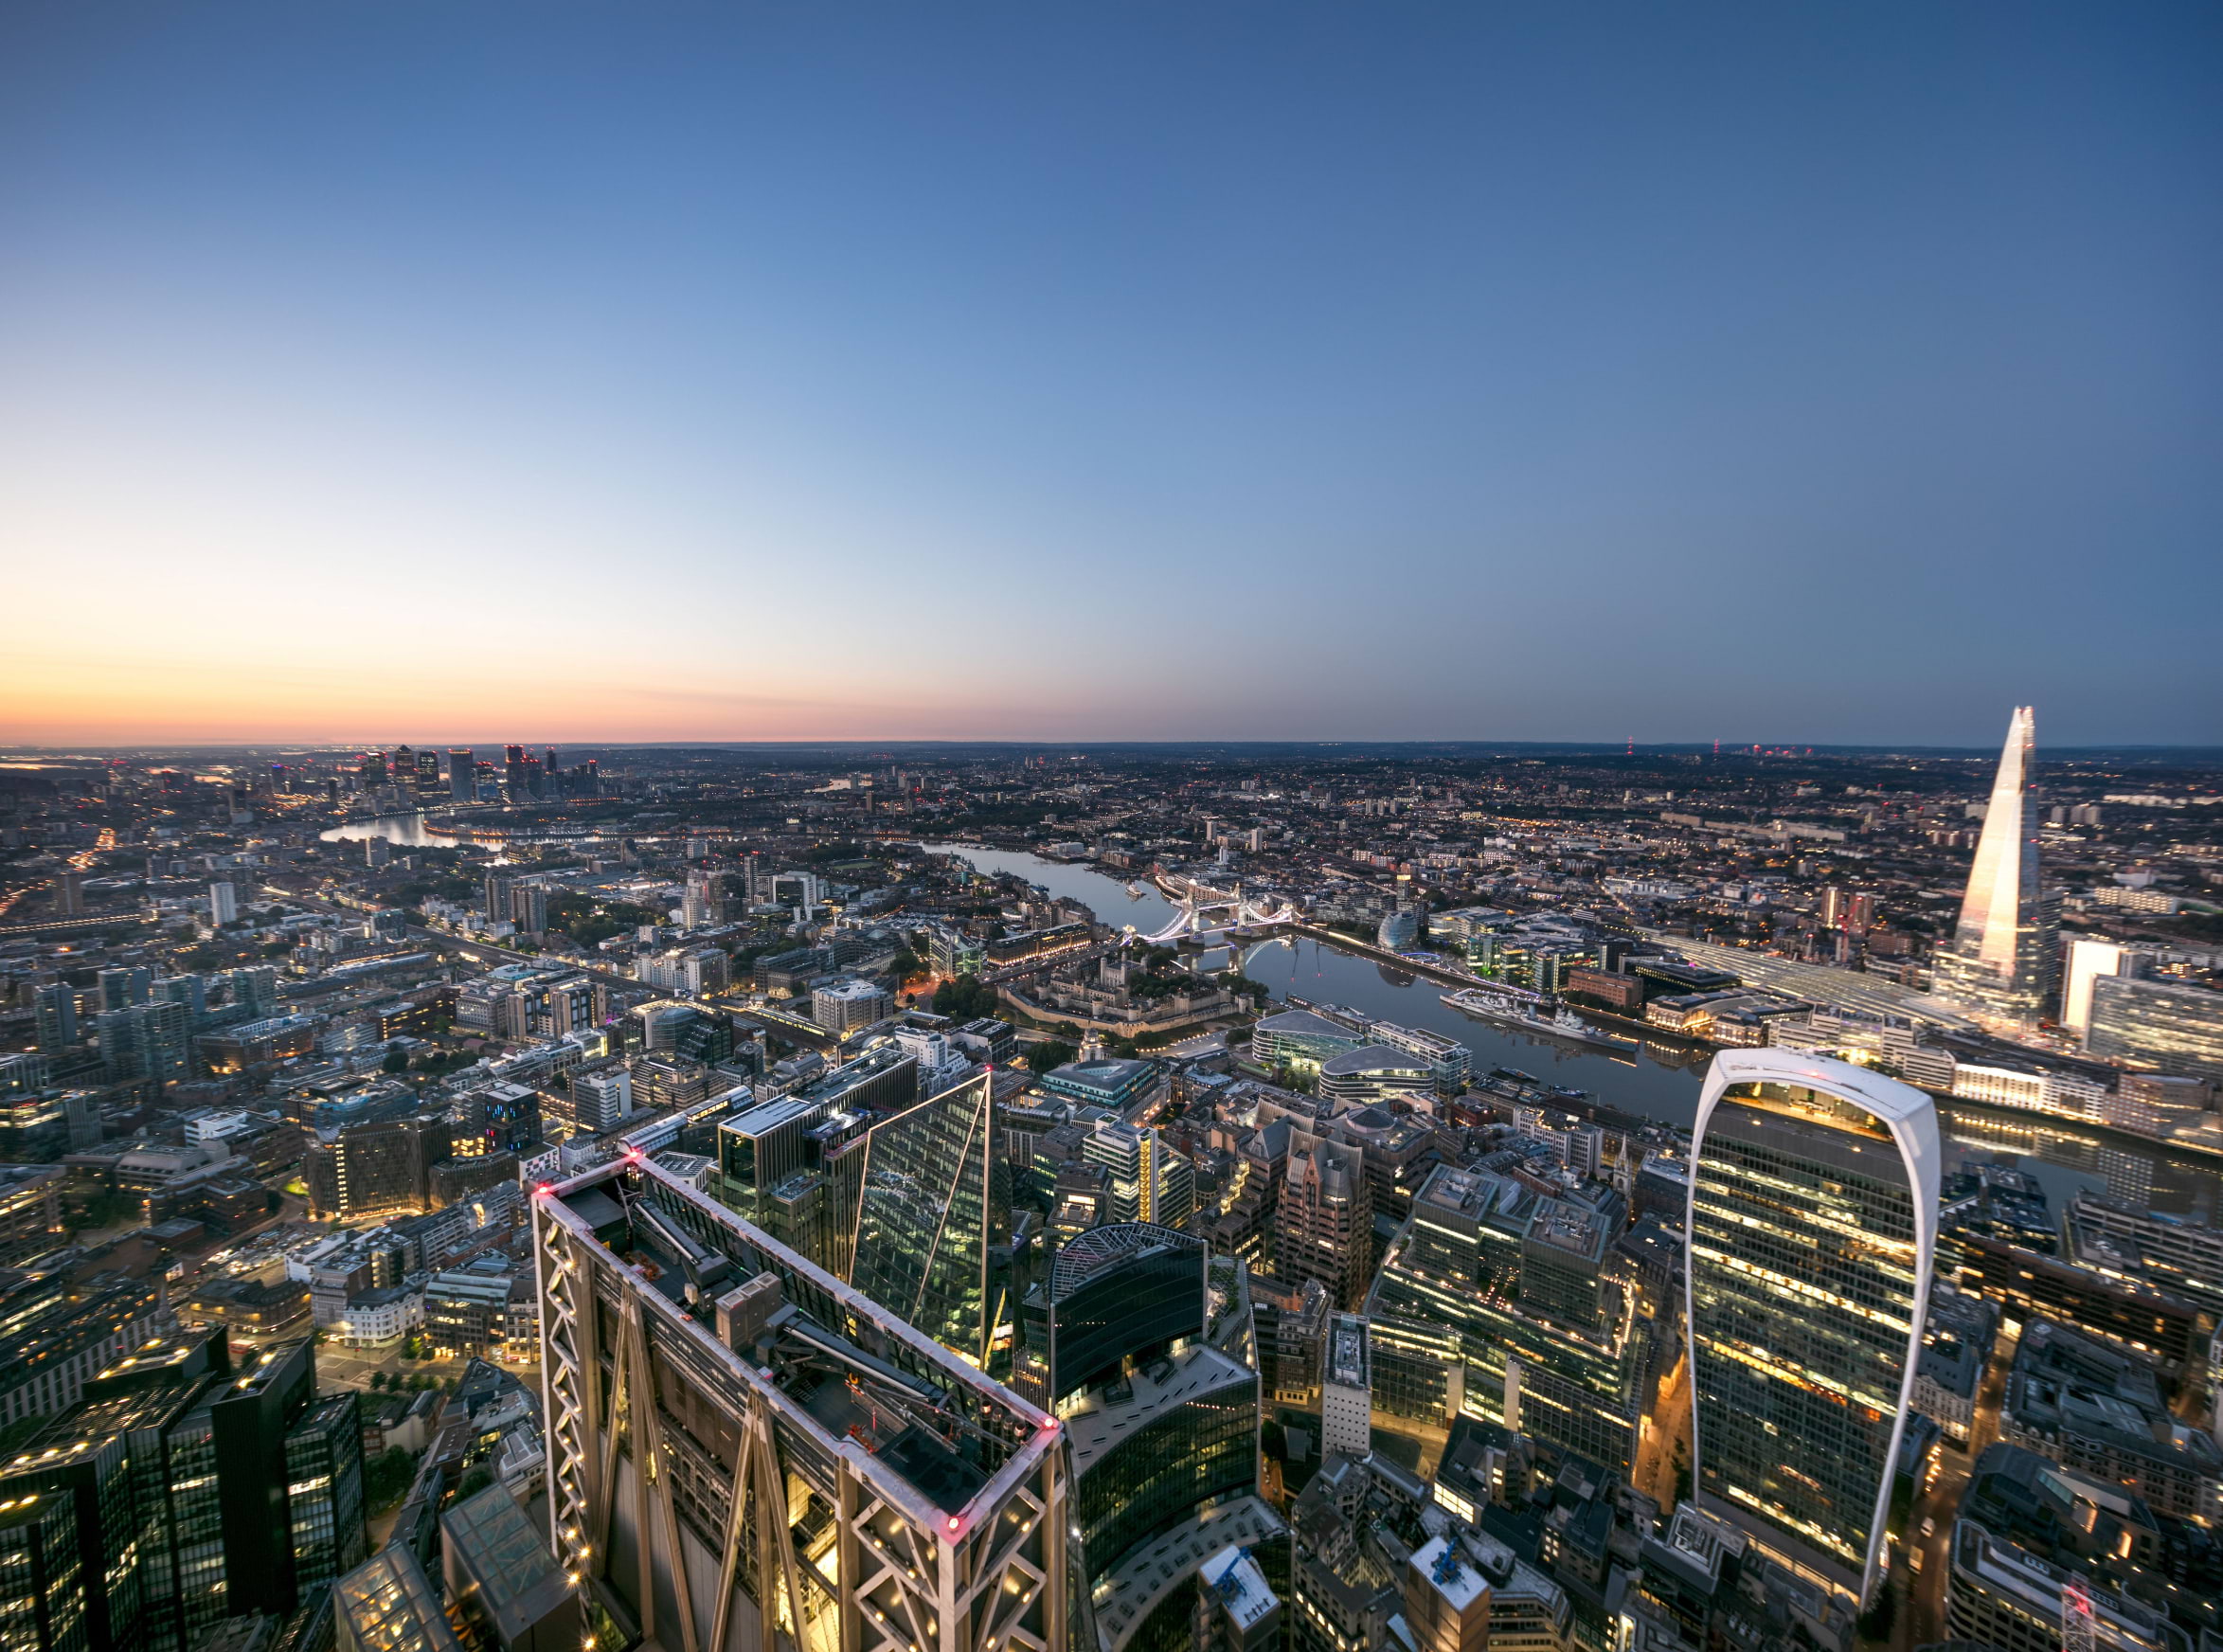 London is getting the highest free public viewing gallery in Europe